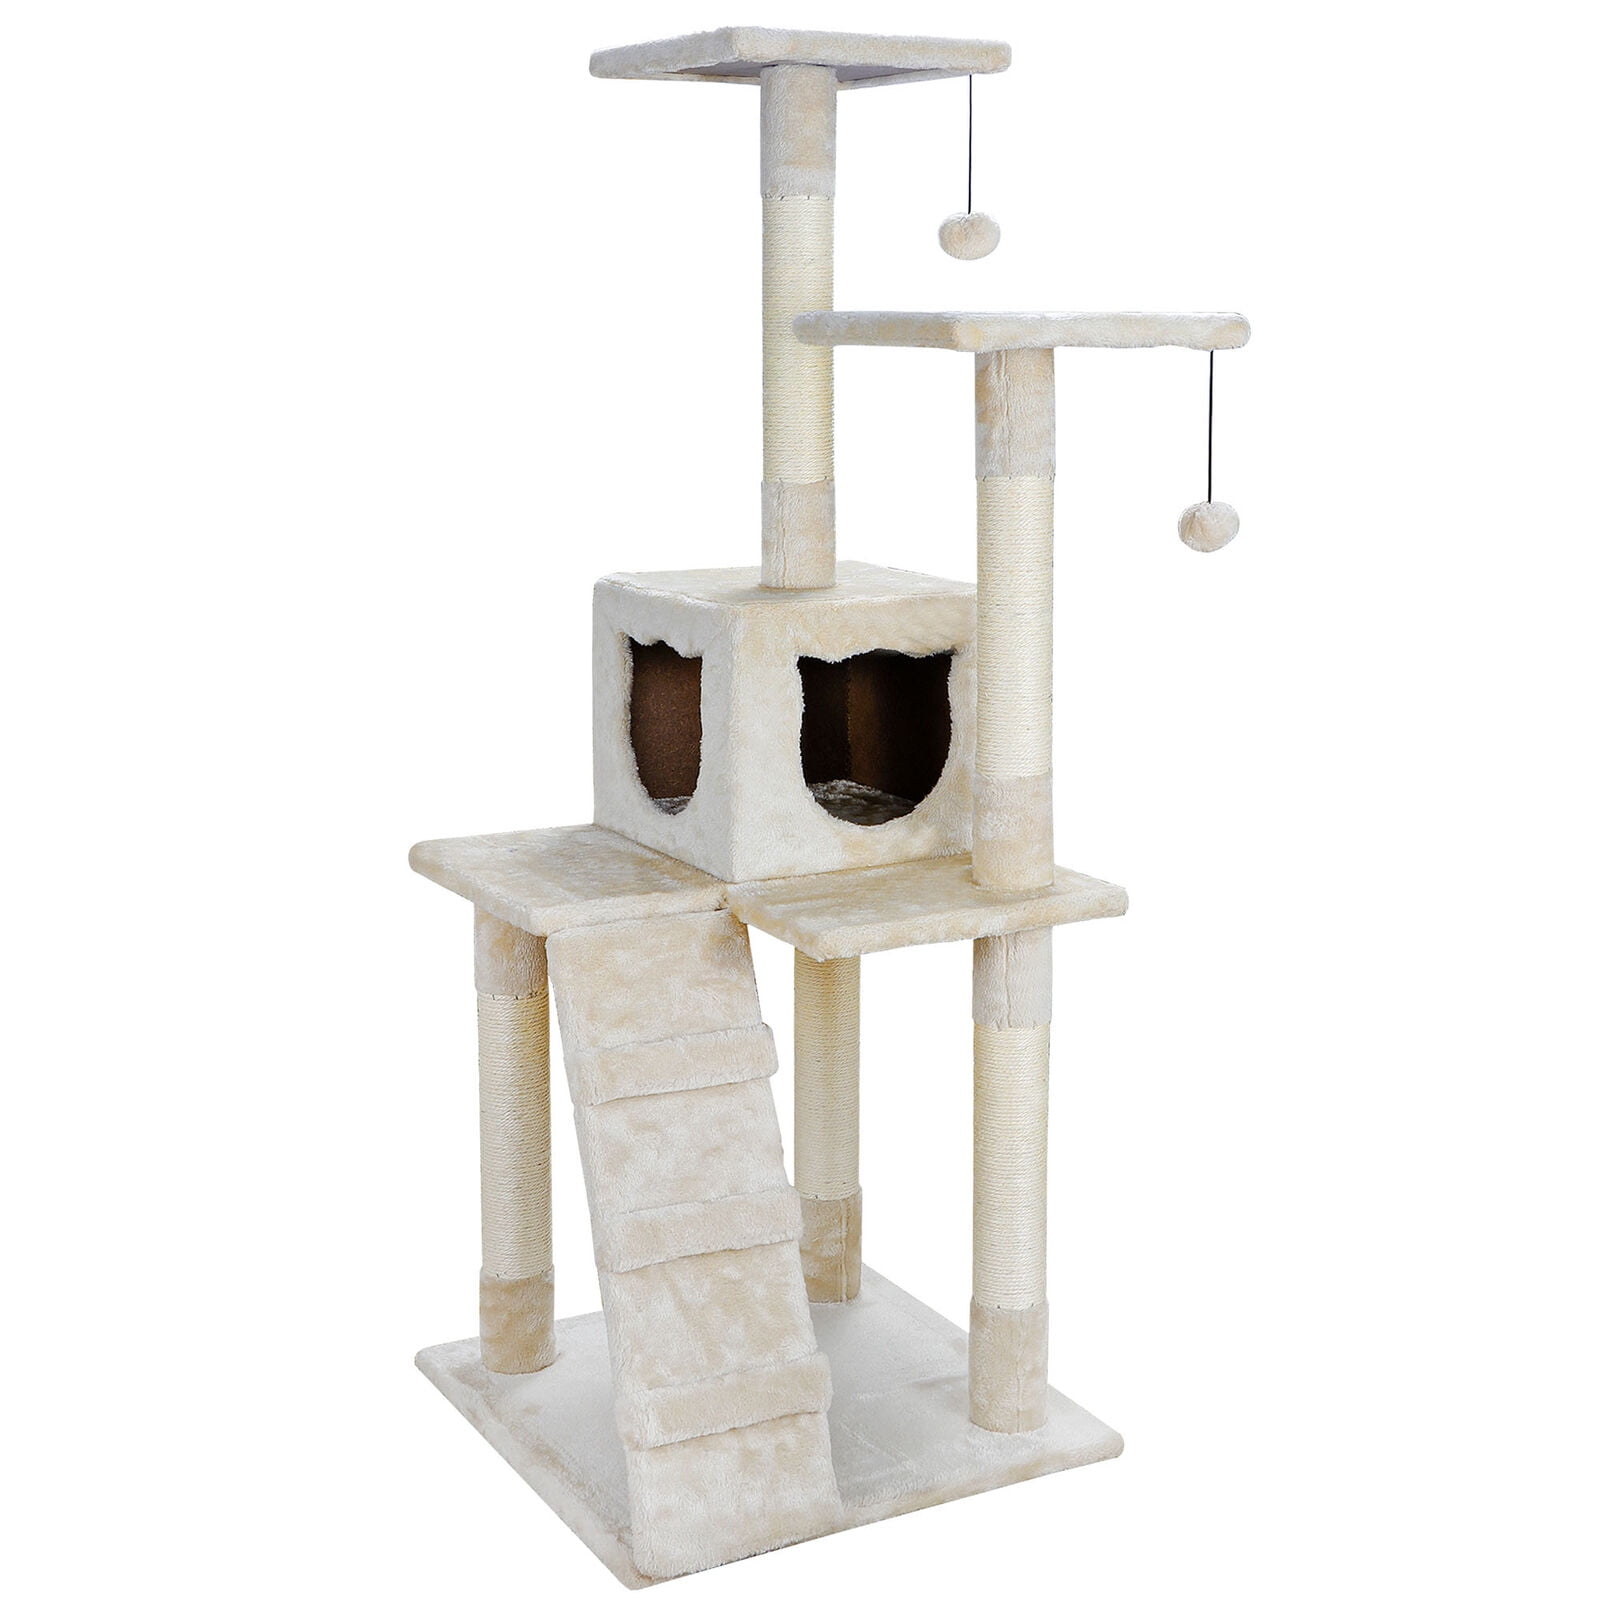 New 32" Cat Tree Tower Condo Furniture Scratching Post Pet Kitty Play House 